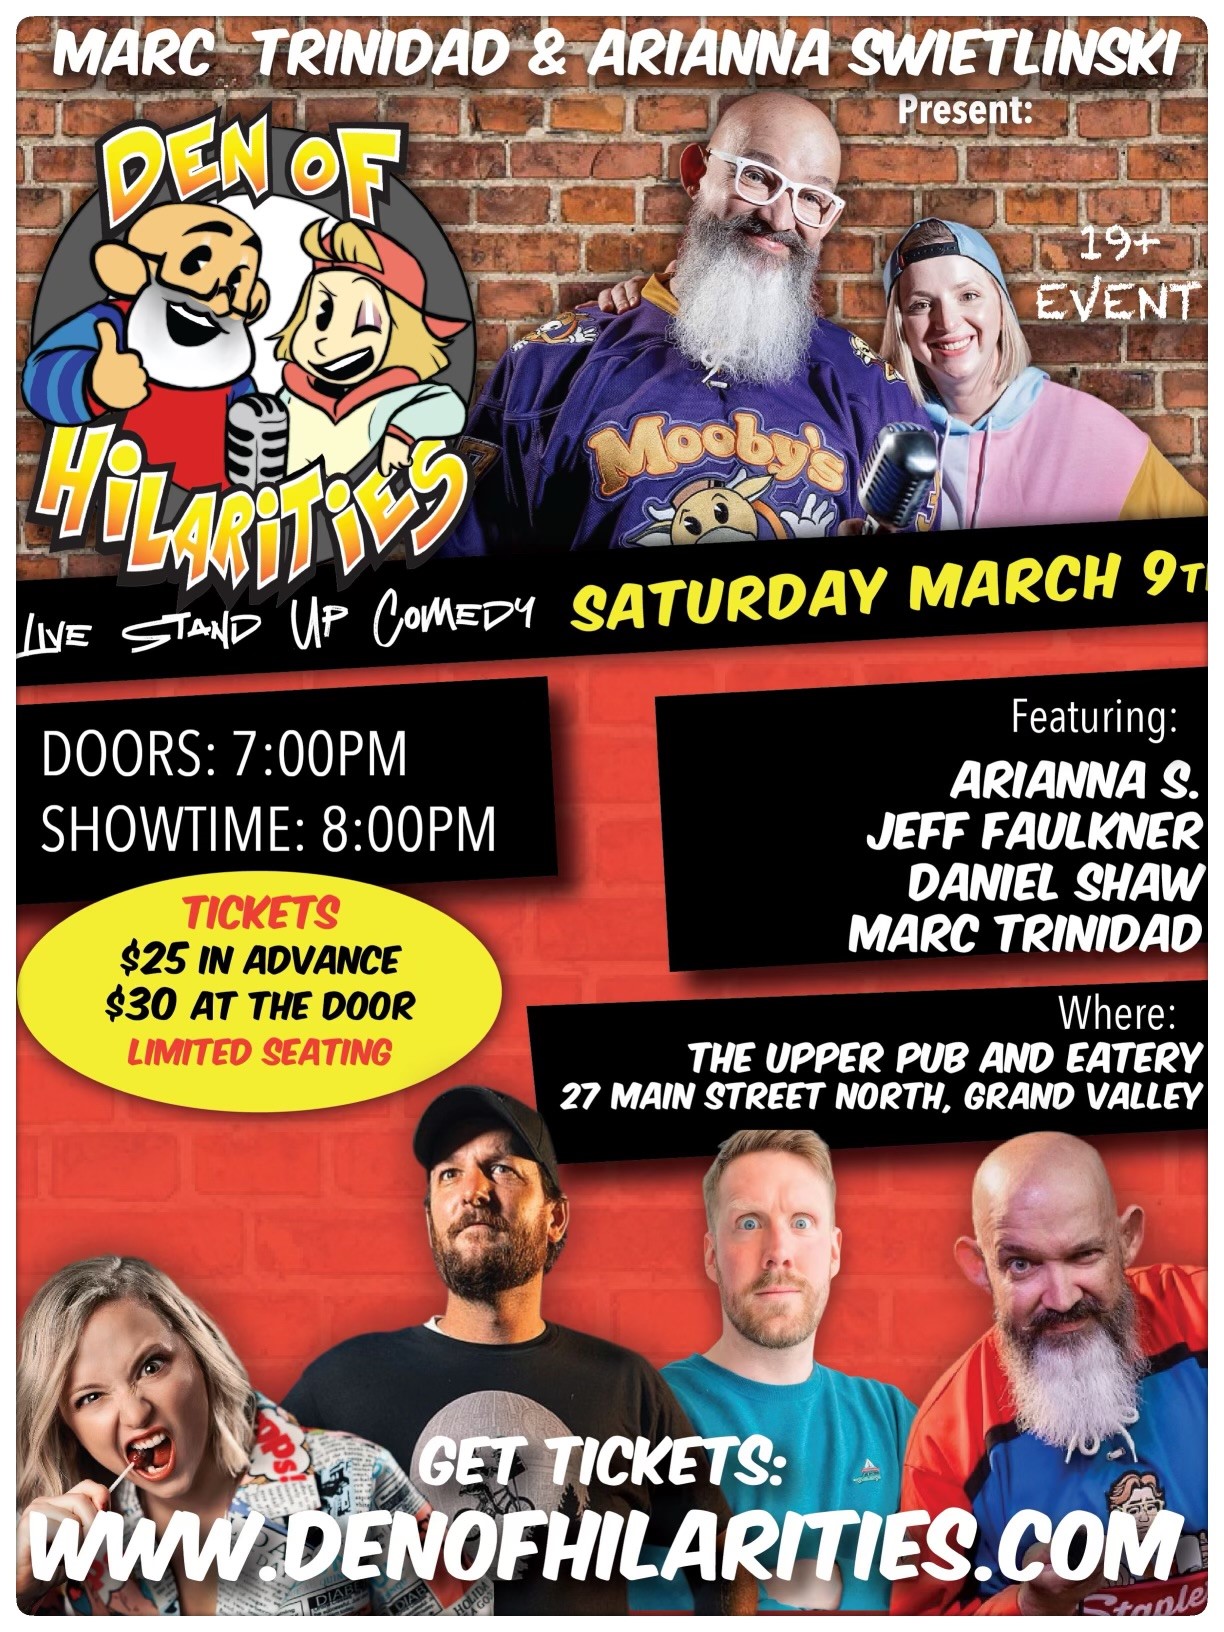 The Upper Pub and Eatery Comedy Show on Mar 09, 20:00@The Upper Pub and Eatery - Buy tickets and Get information on Marc Trinidad Ent 